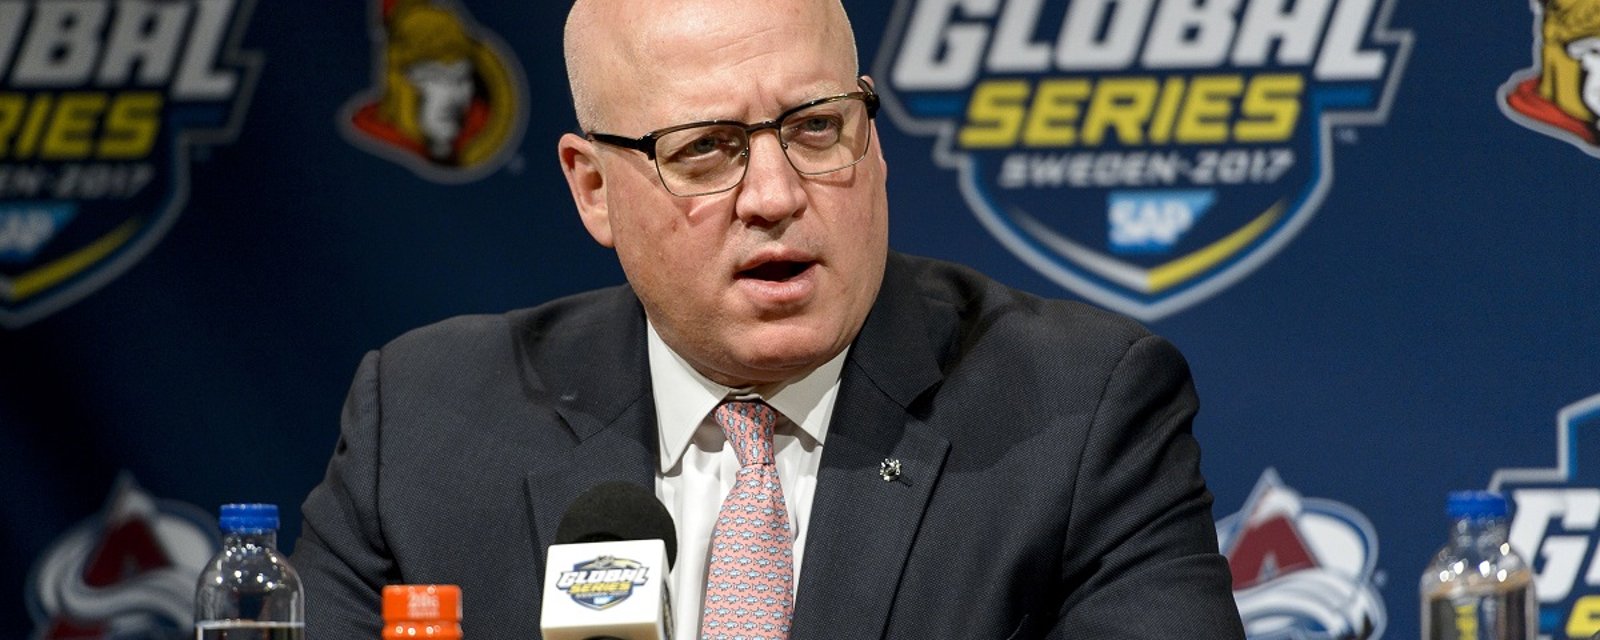 Bill Daly comments on the future of NHL hockey in Quebec City.